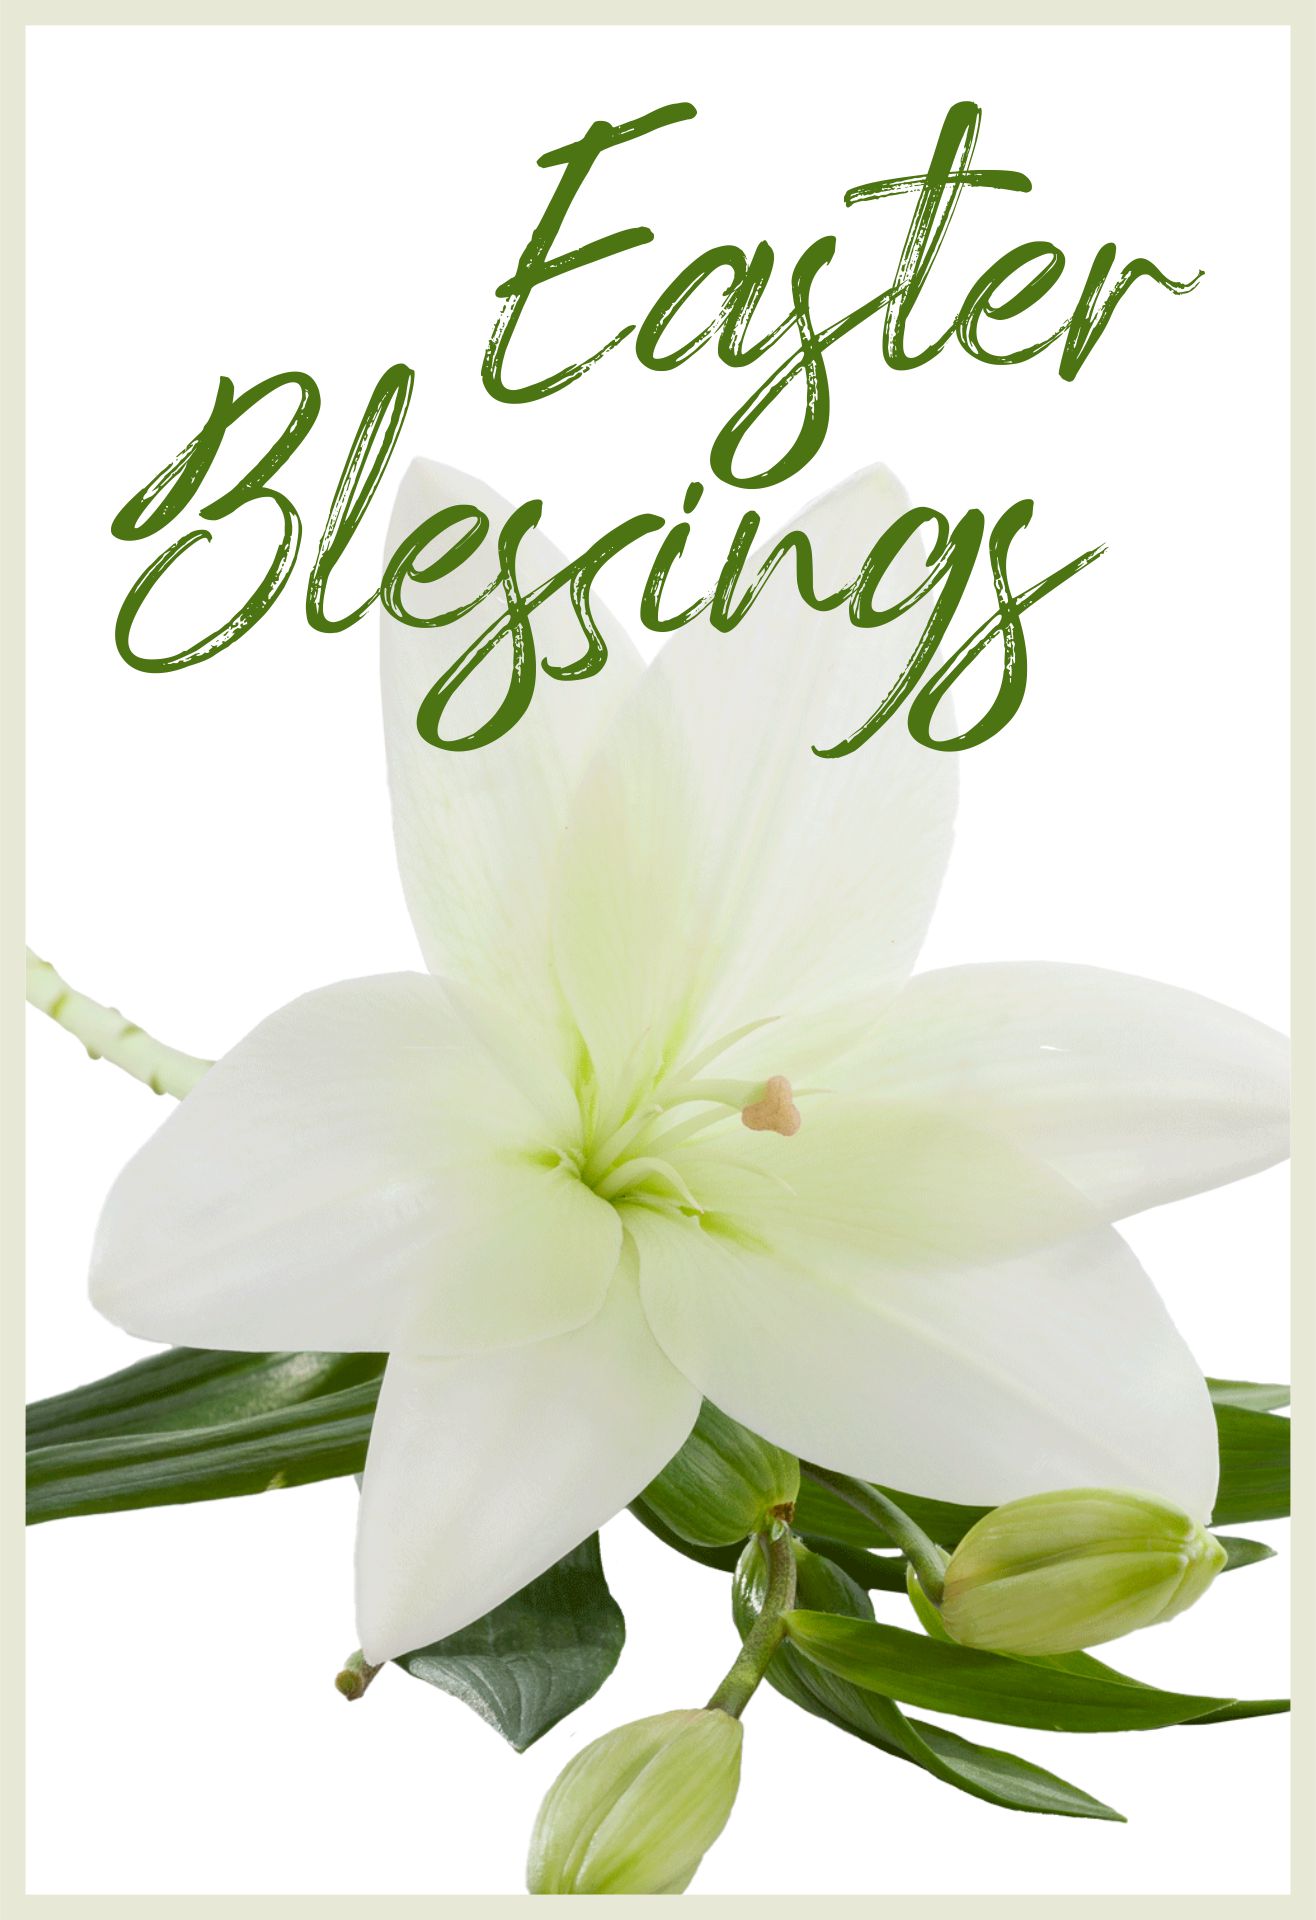 Christian Easter Greeting Cards